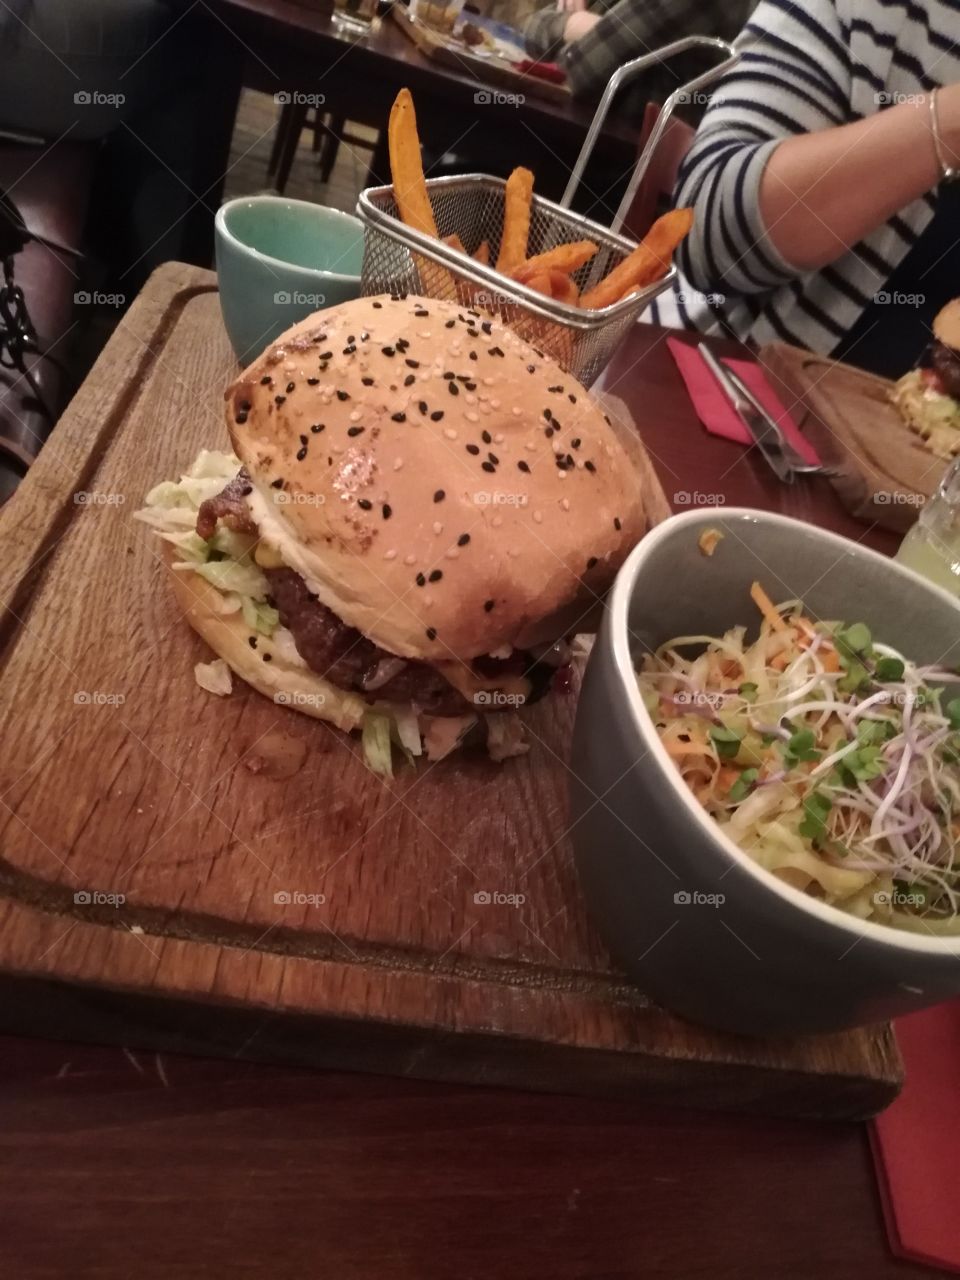 Burger and salad with French fries